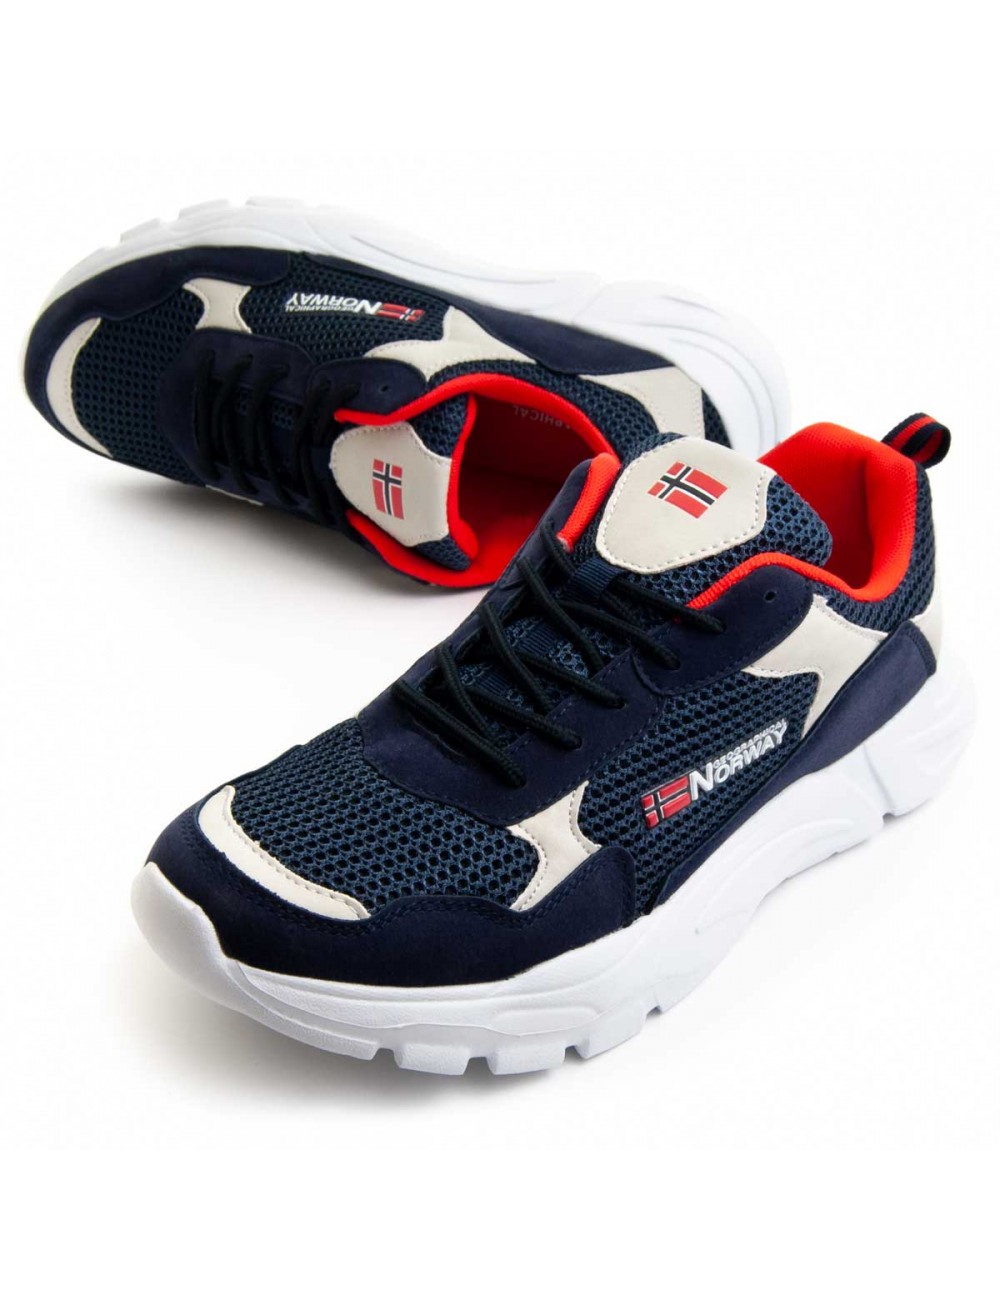 Sneaker tendencia para hombre Geographical Norway Totalway 74699